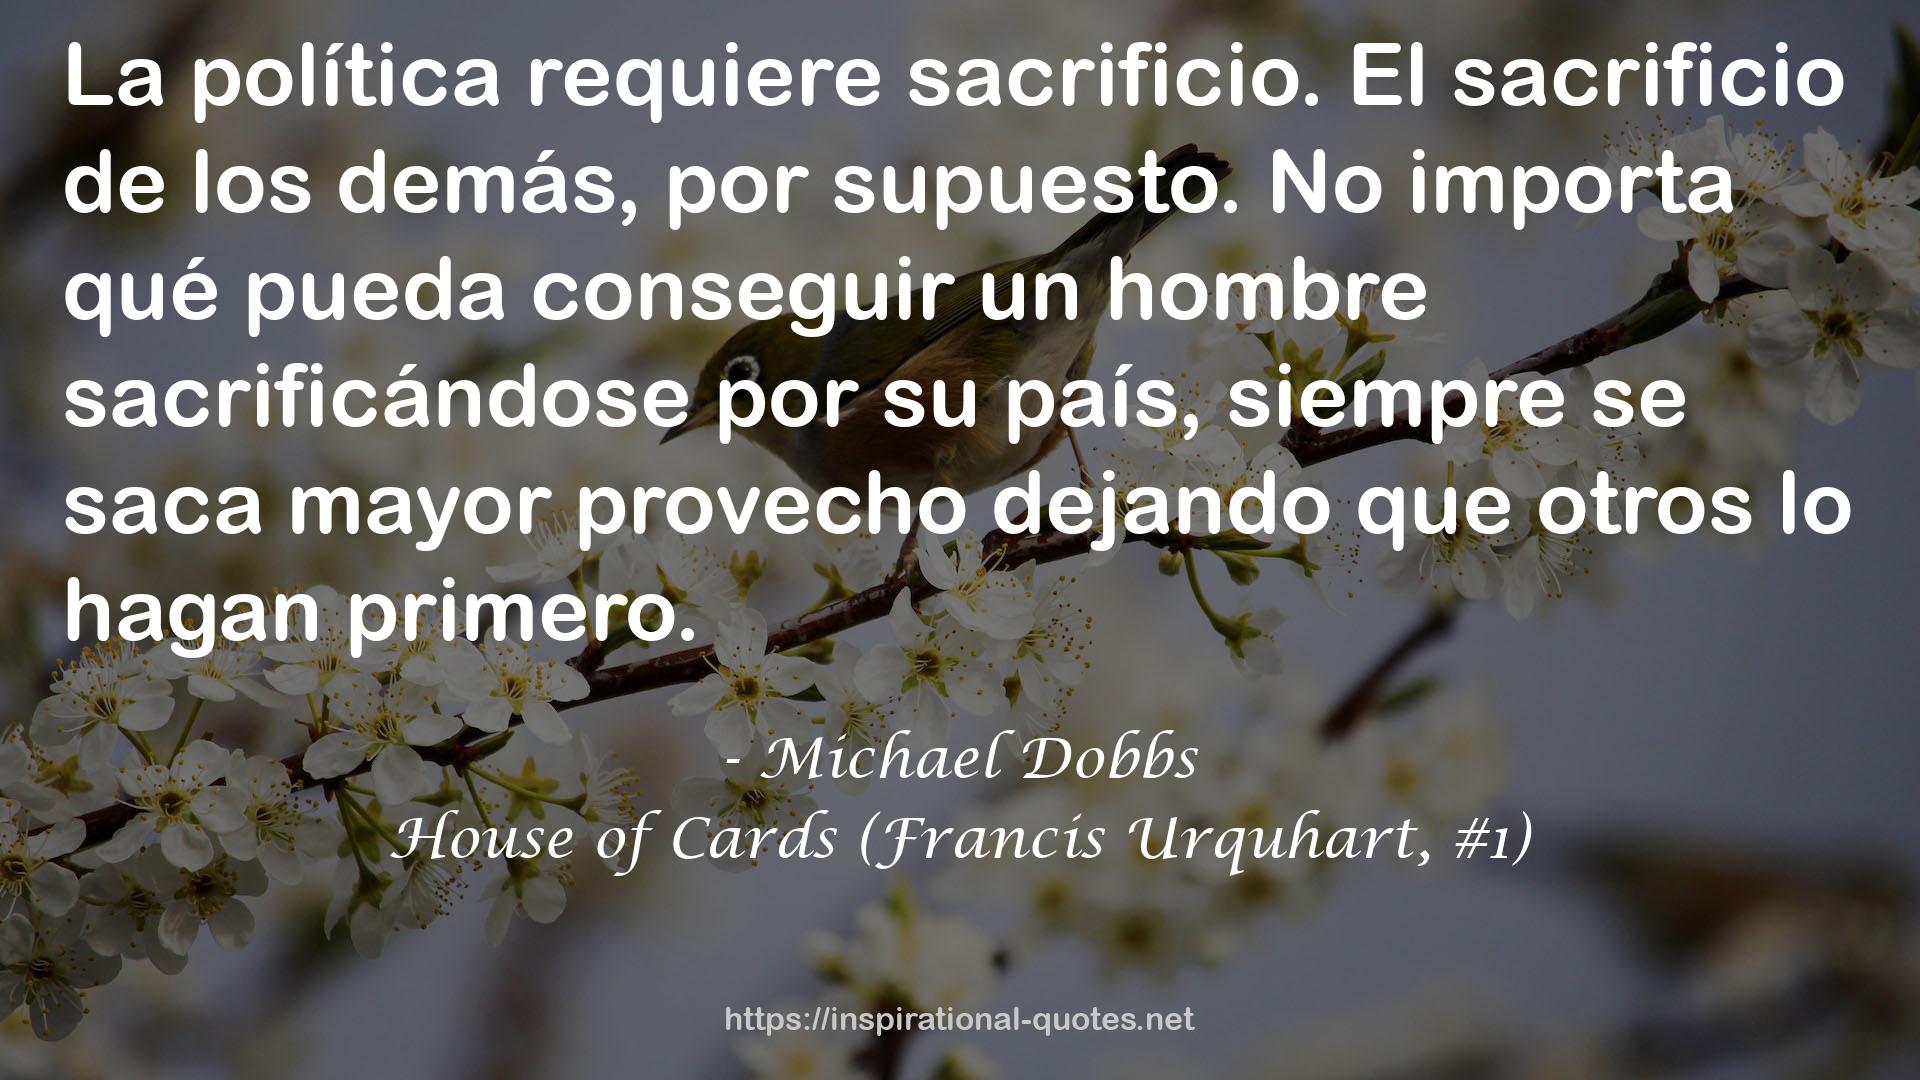 House of Cards (Francis Urquhart, #1) QUOTES